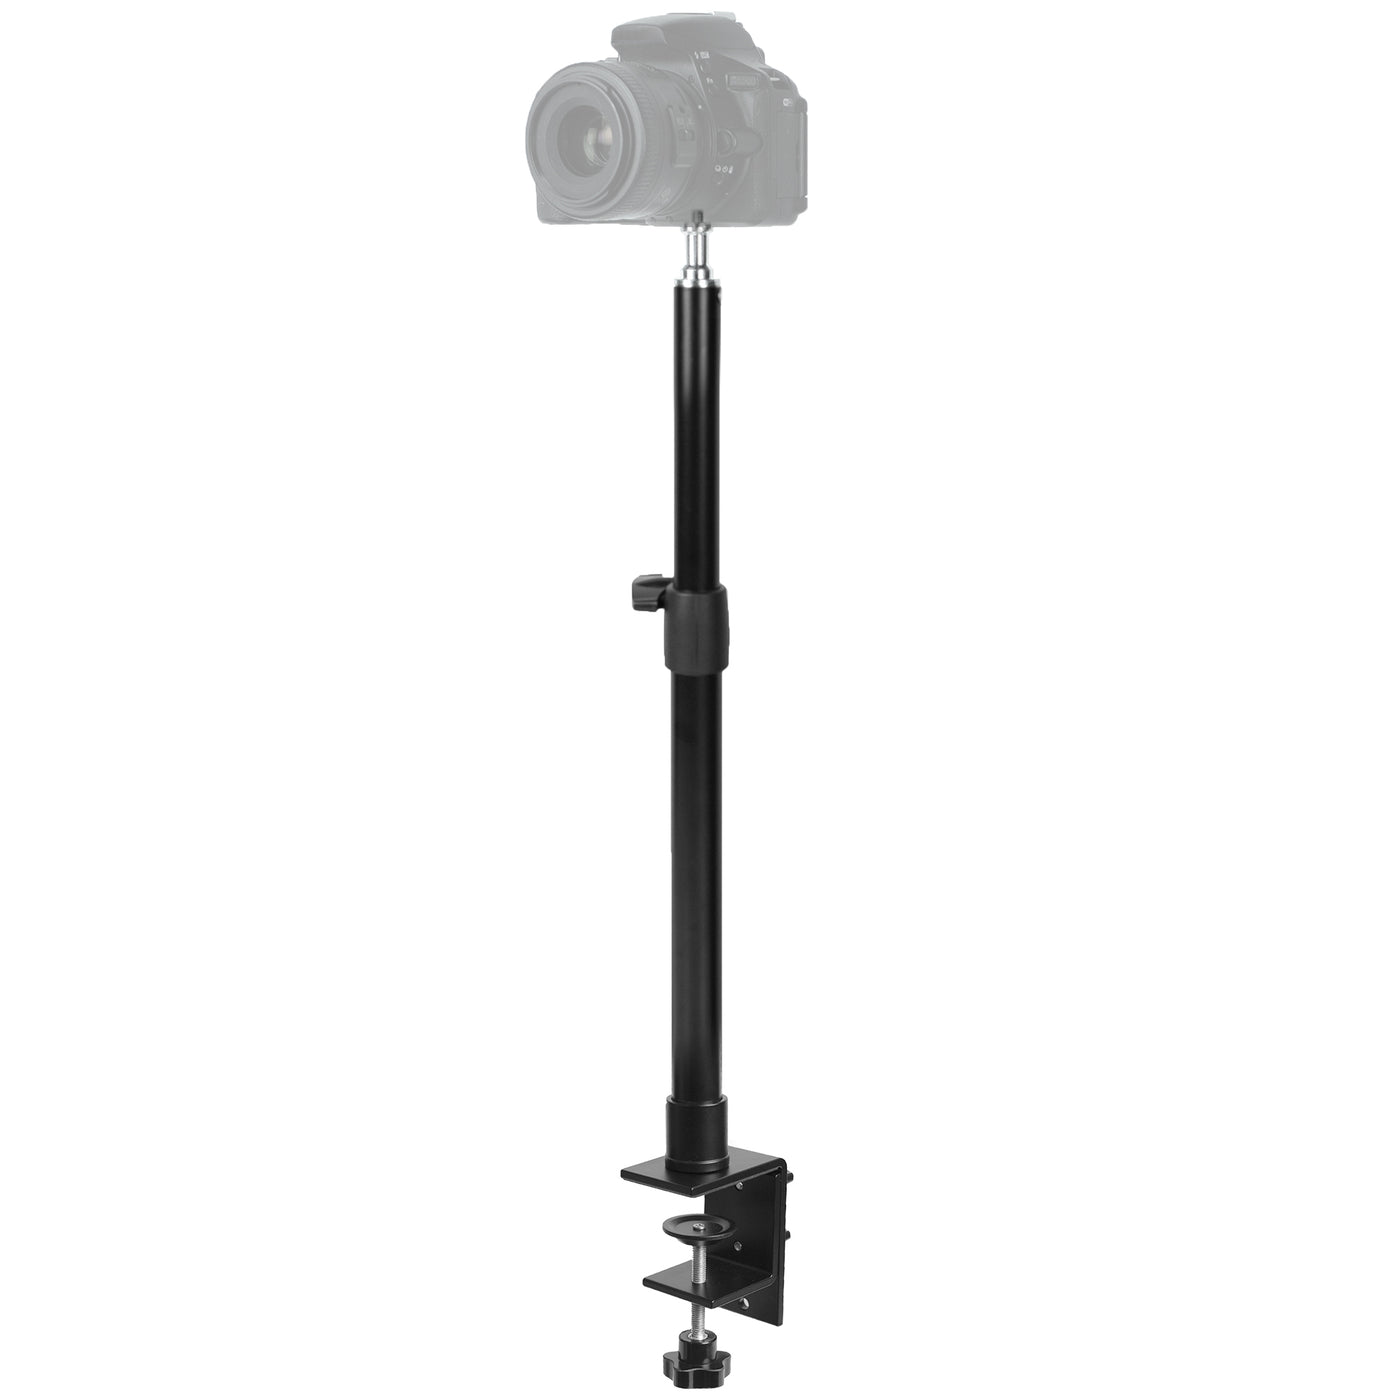 Adjustable heavy-duty clamp on tripod stand for video lighting and camera use.